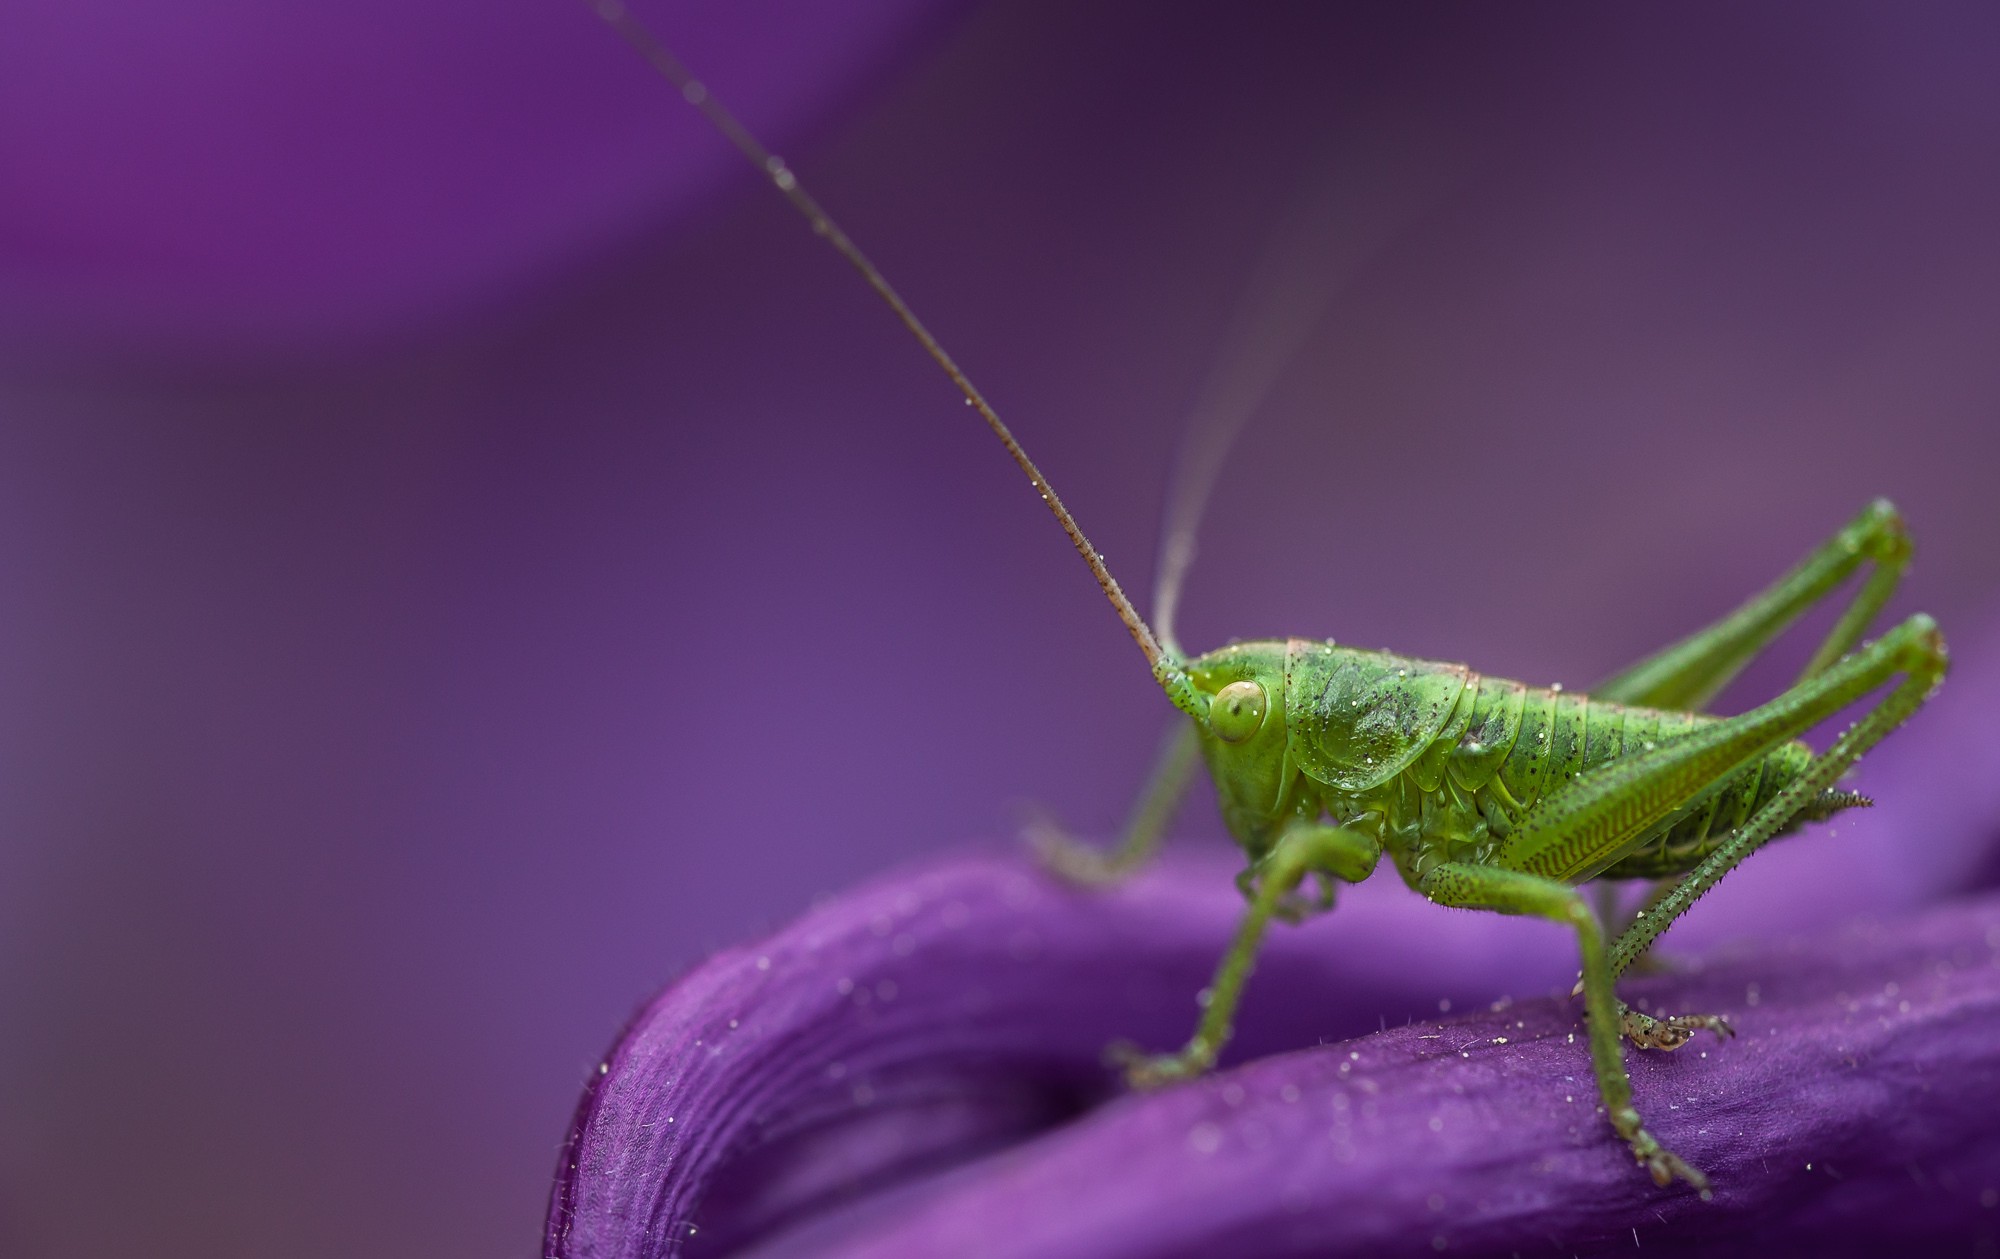 Wallpapers animals grasshopper insect on the desktop